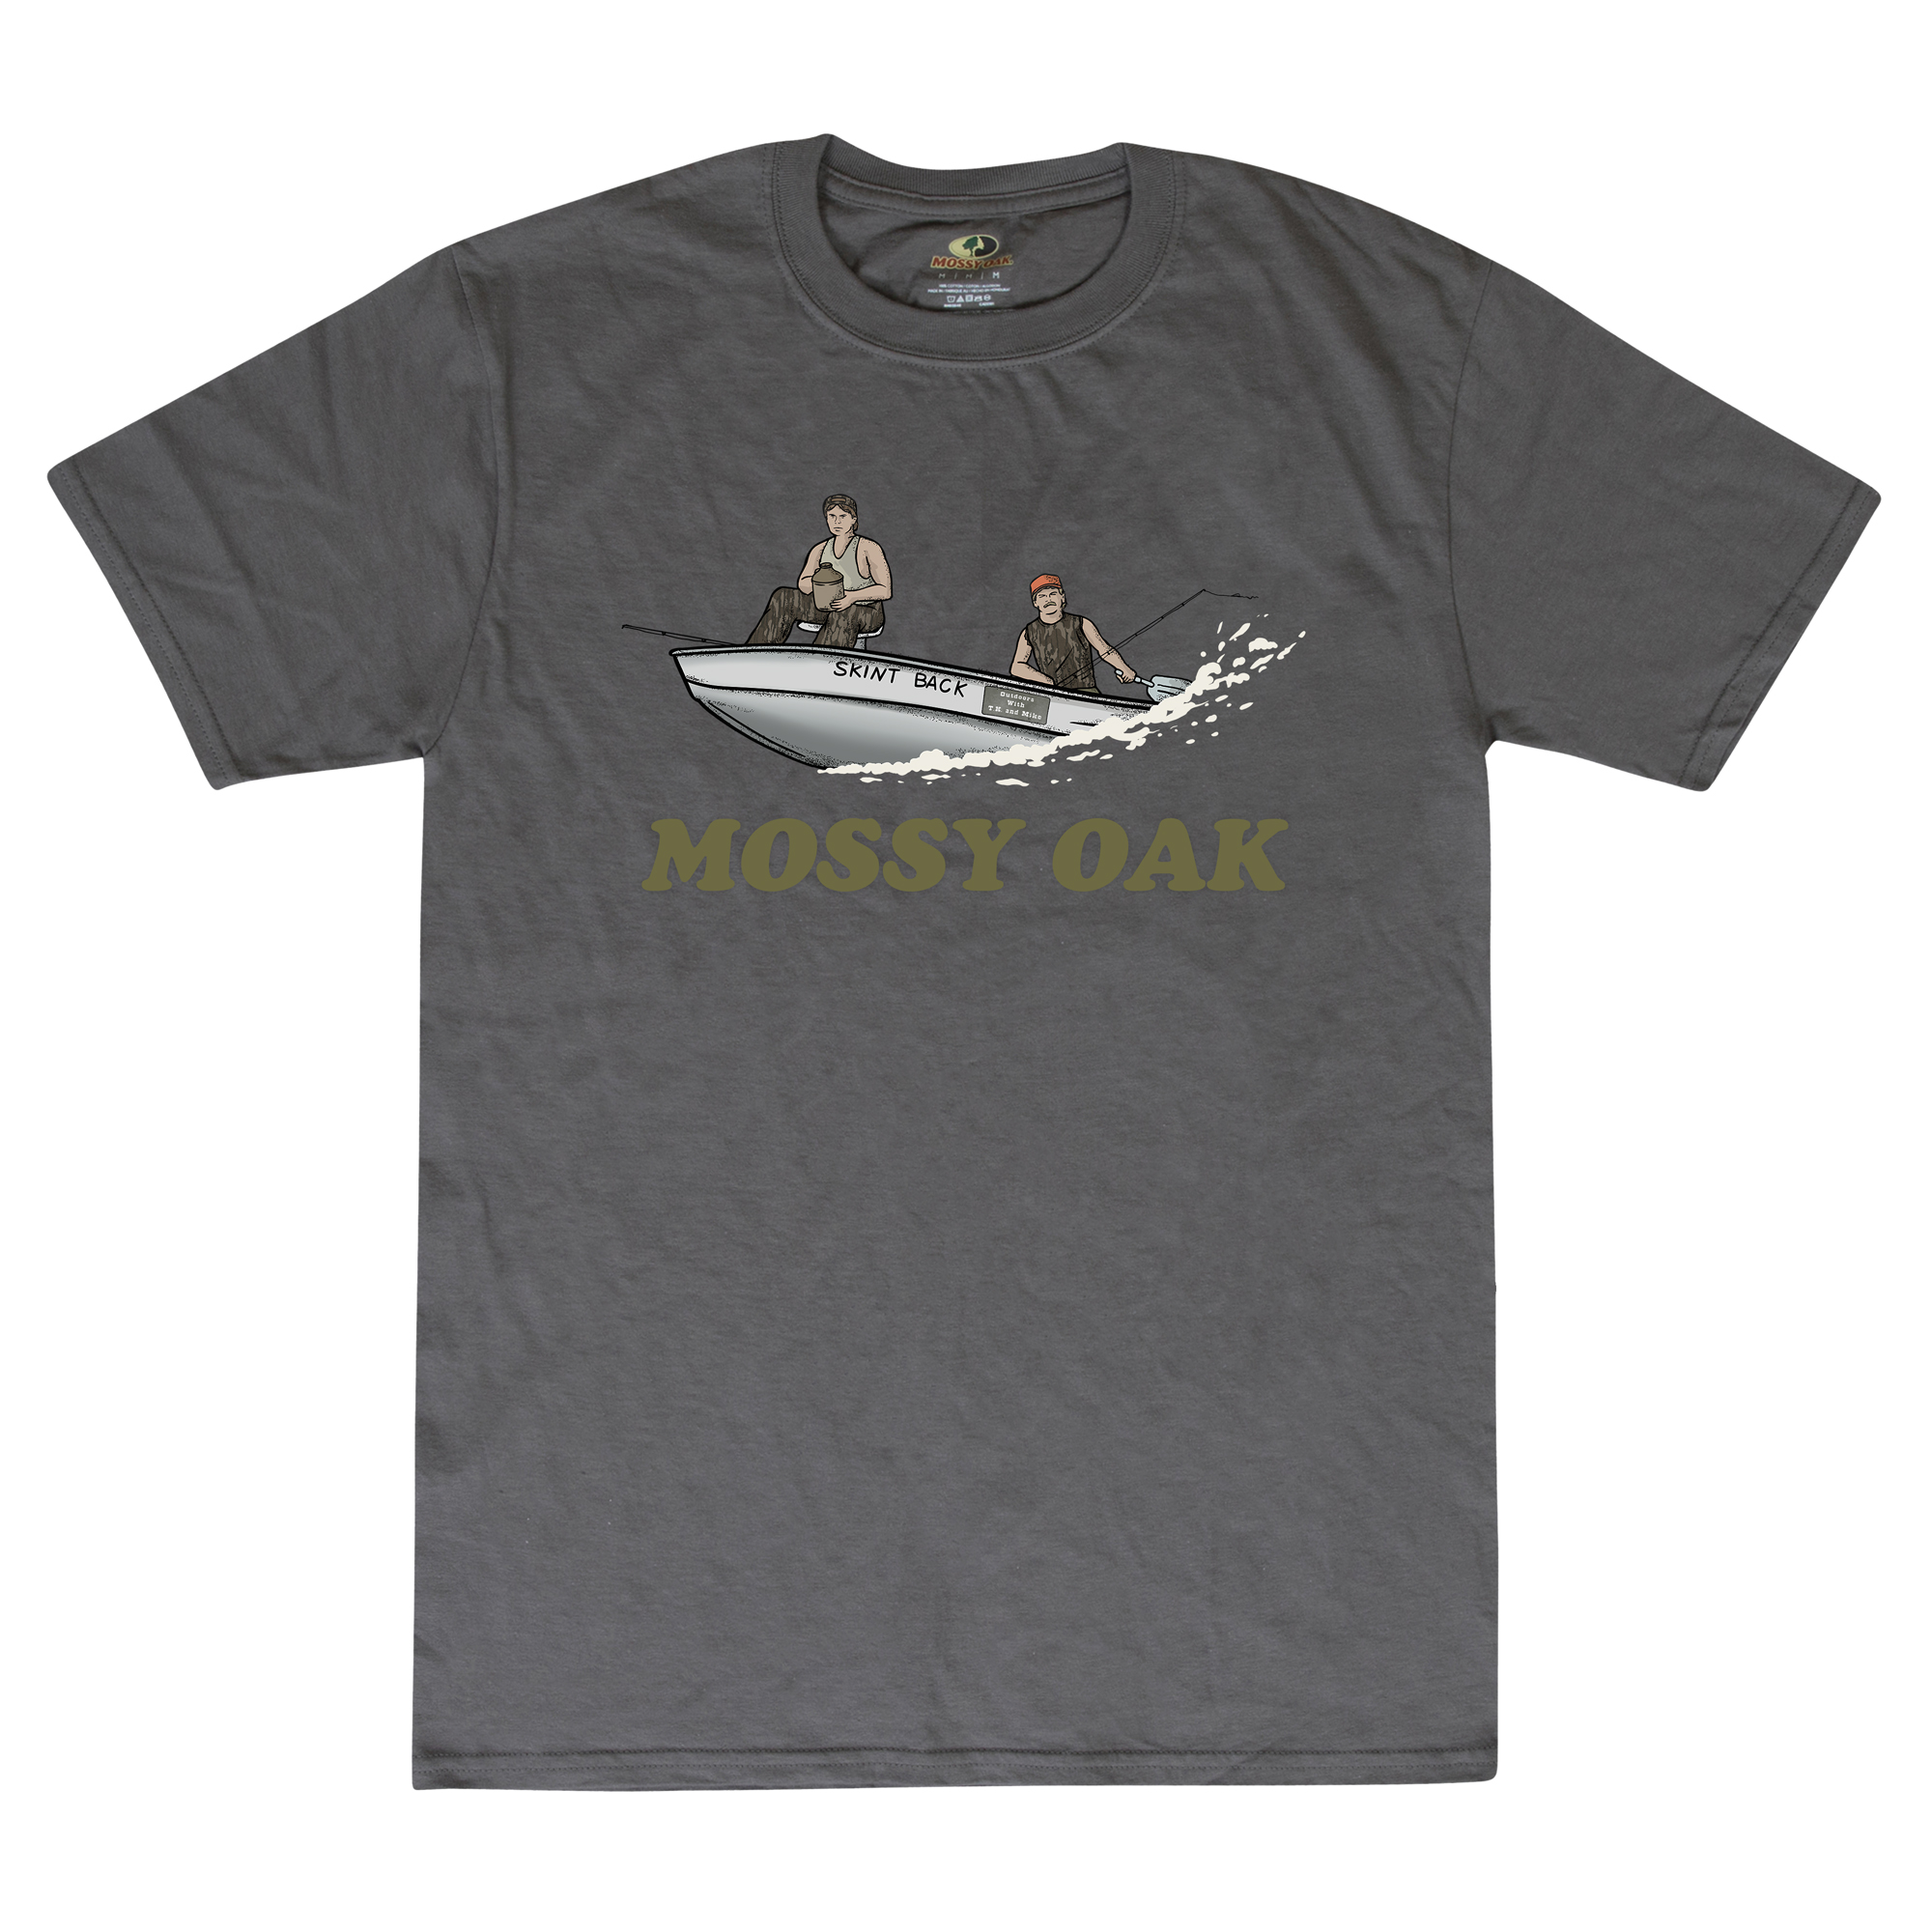 tk and mike t shirt of them riding on a John boat